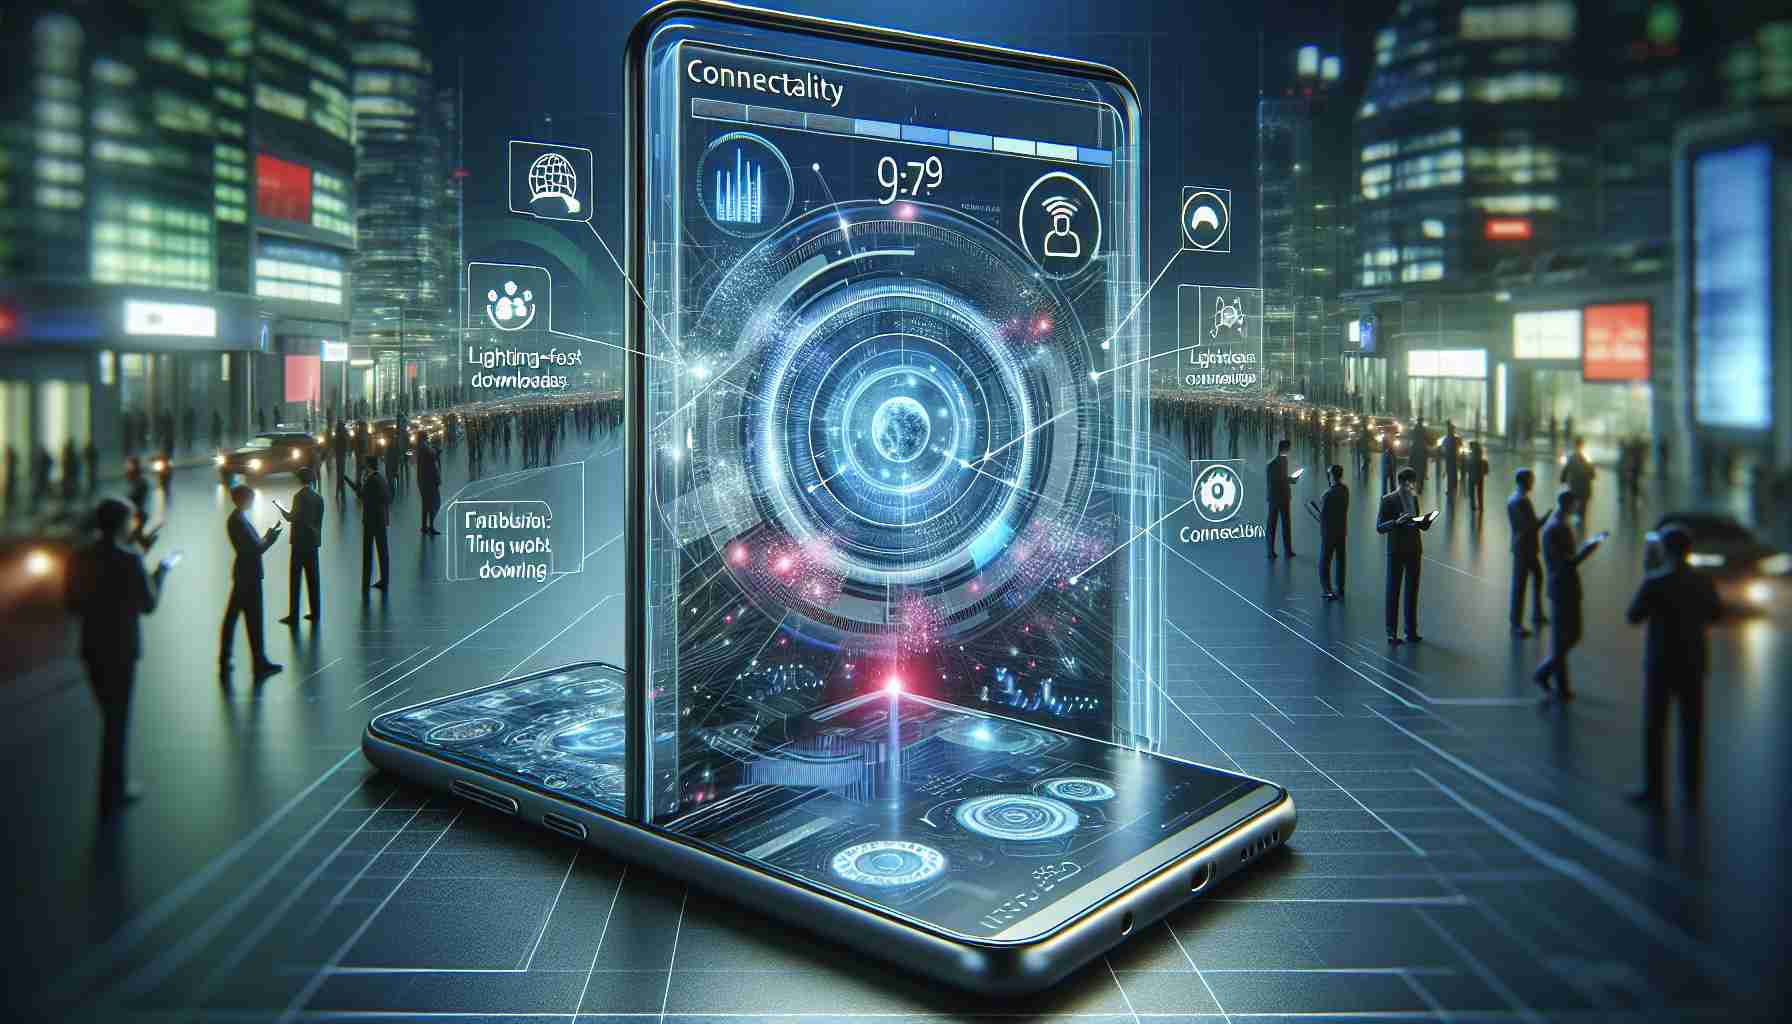 New Capability in Smartphone Connectivity: Enhancing User Experience